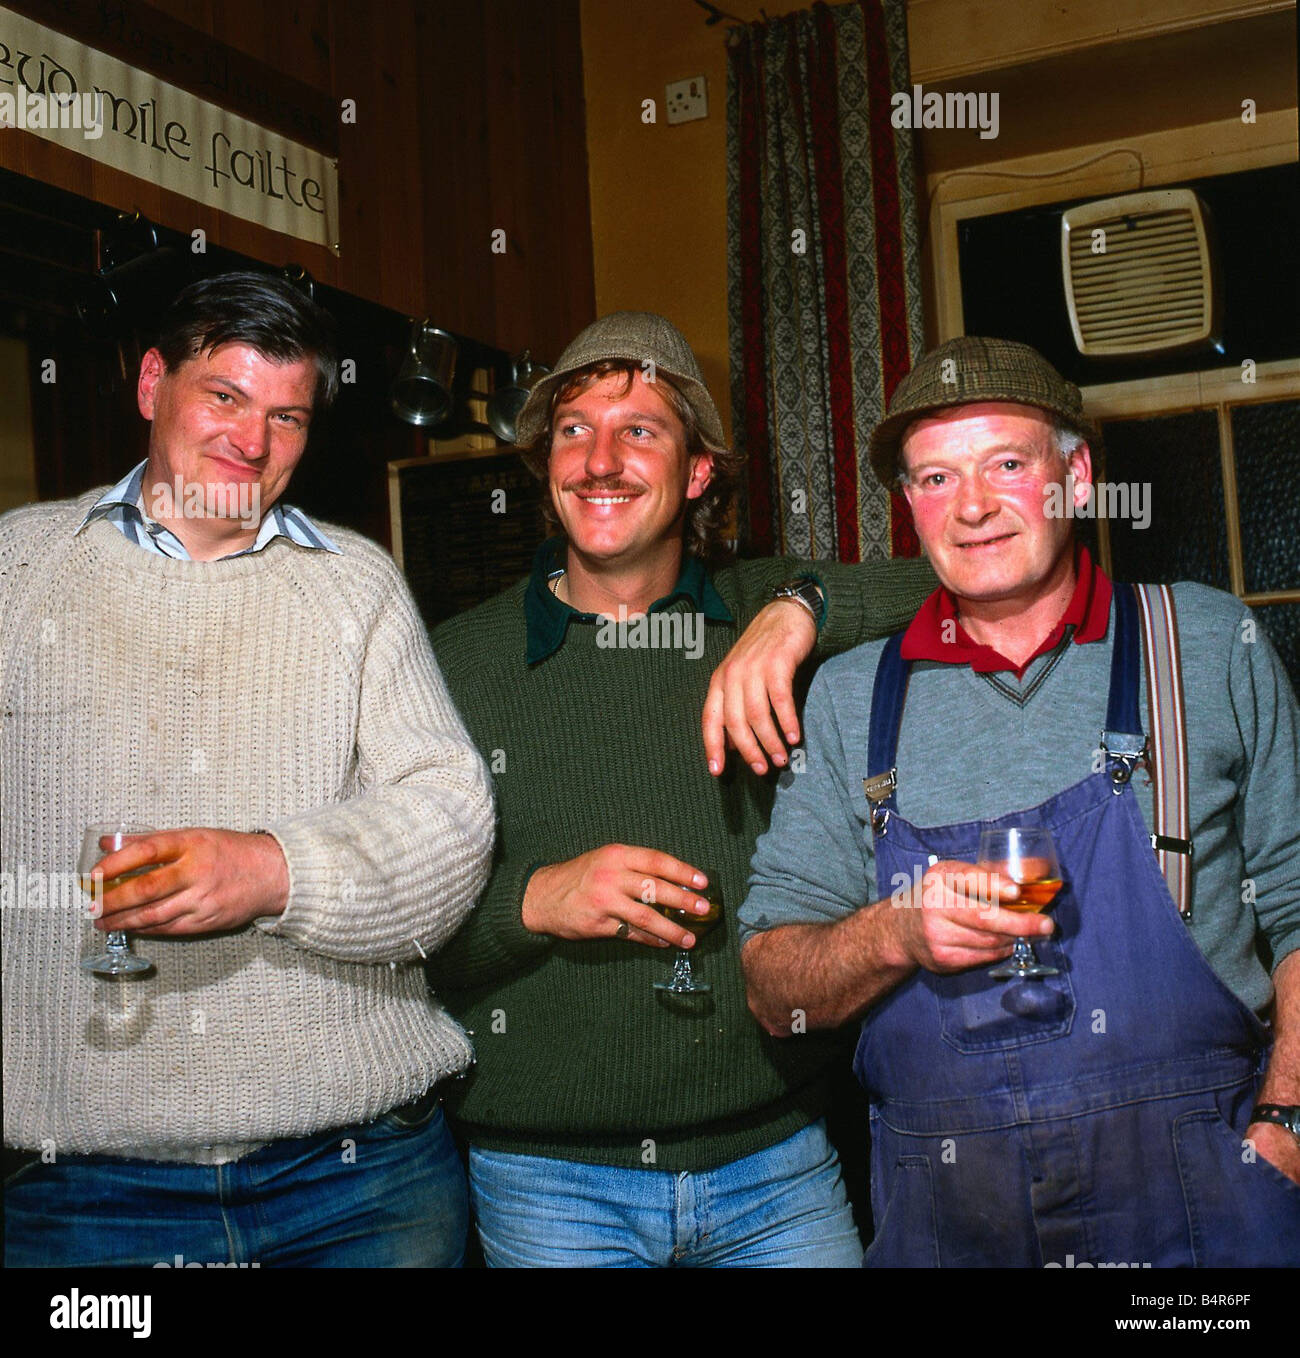 Ian Botham cricketer October 1982 Enjoying drink in pub with locals Stock Photo